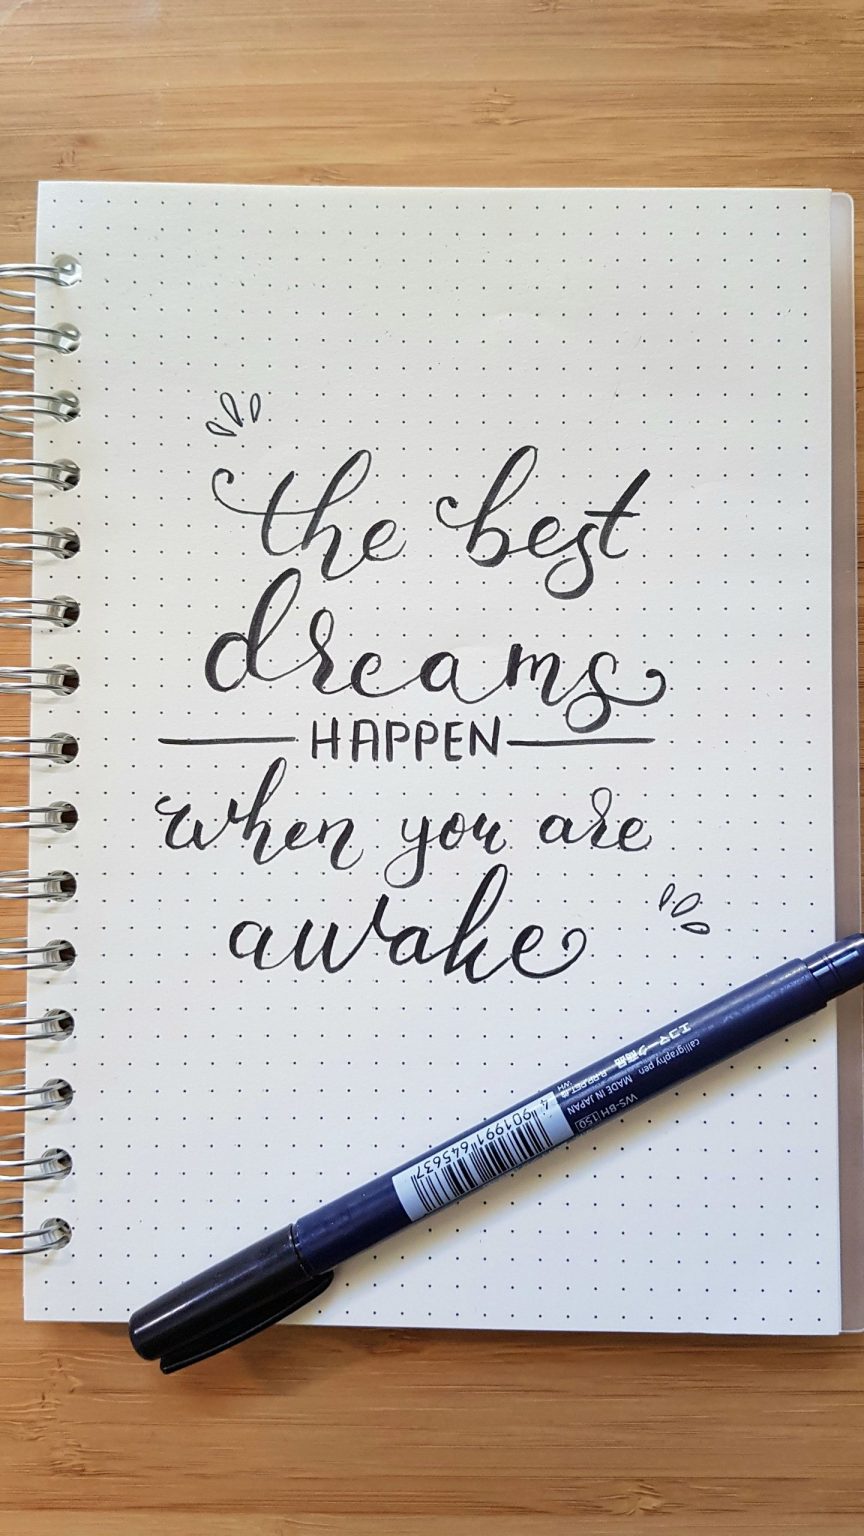 The Best Dreams Happen When You are Awake Wallpaper